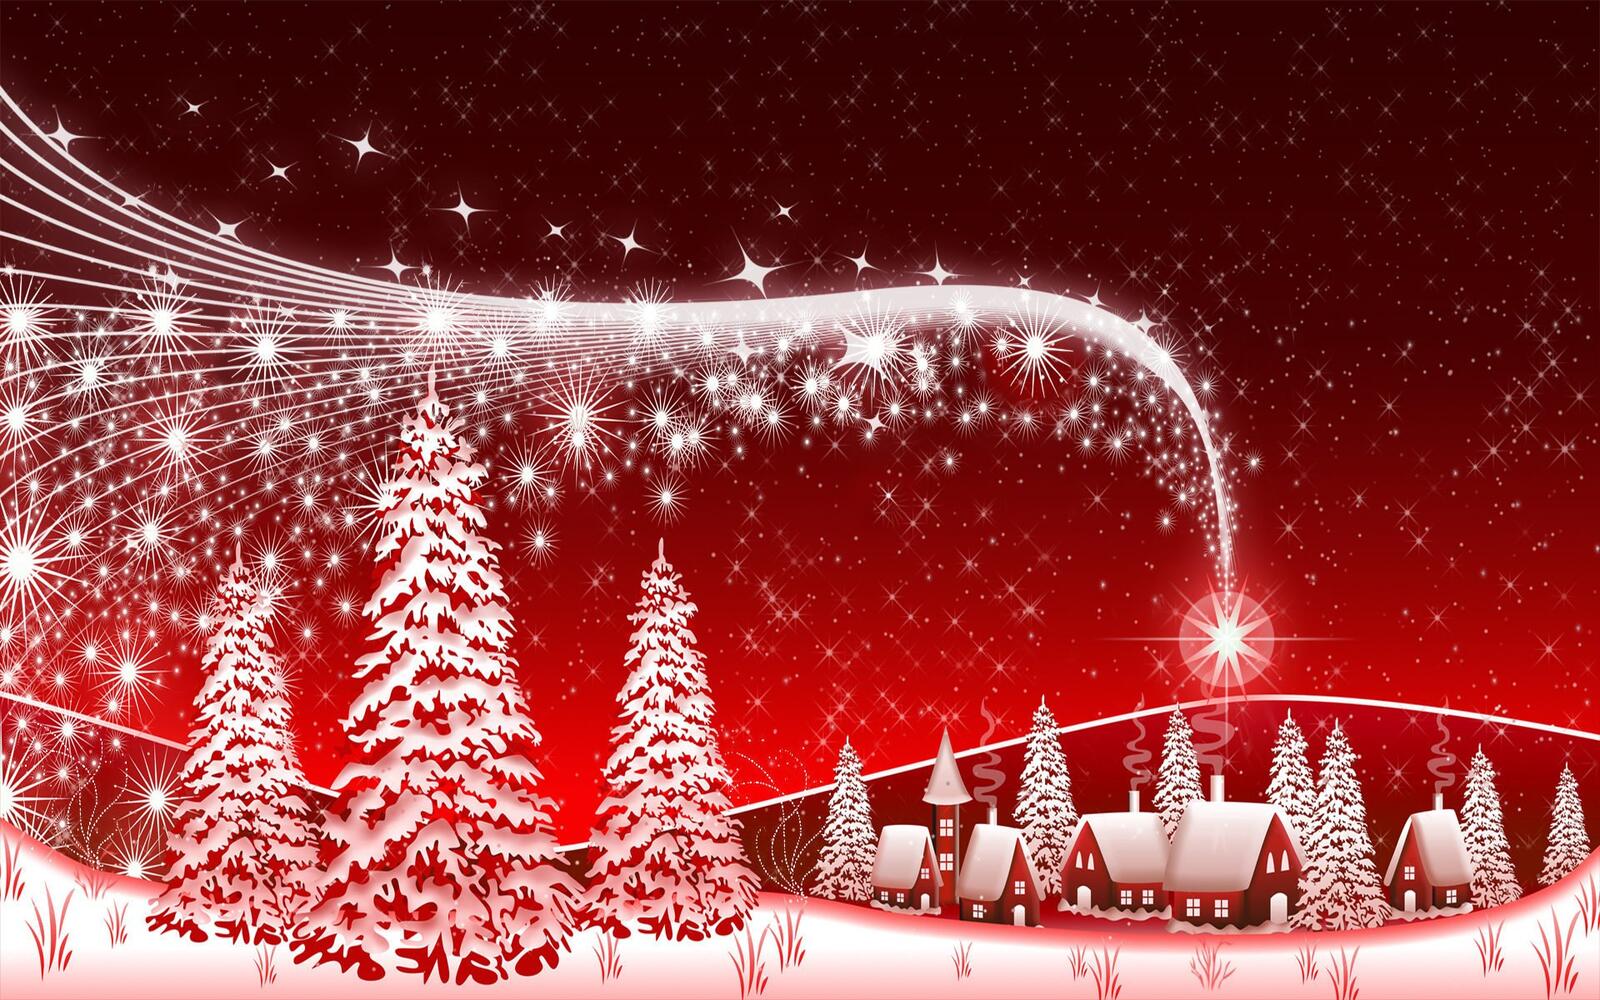 Wallpapers volshebstvo snow christmas trees on the desktop